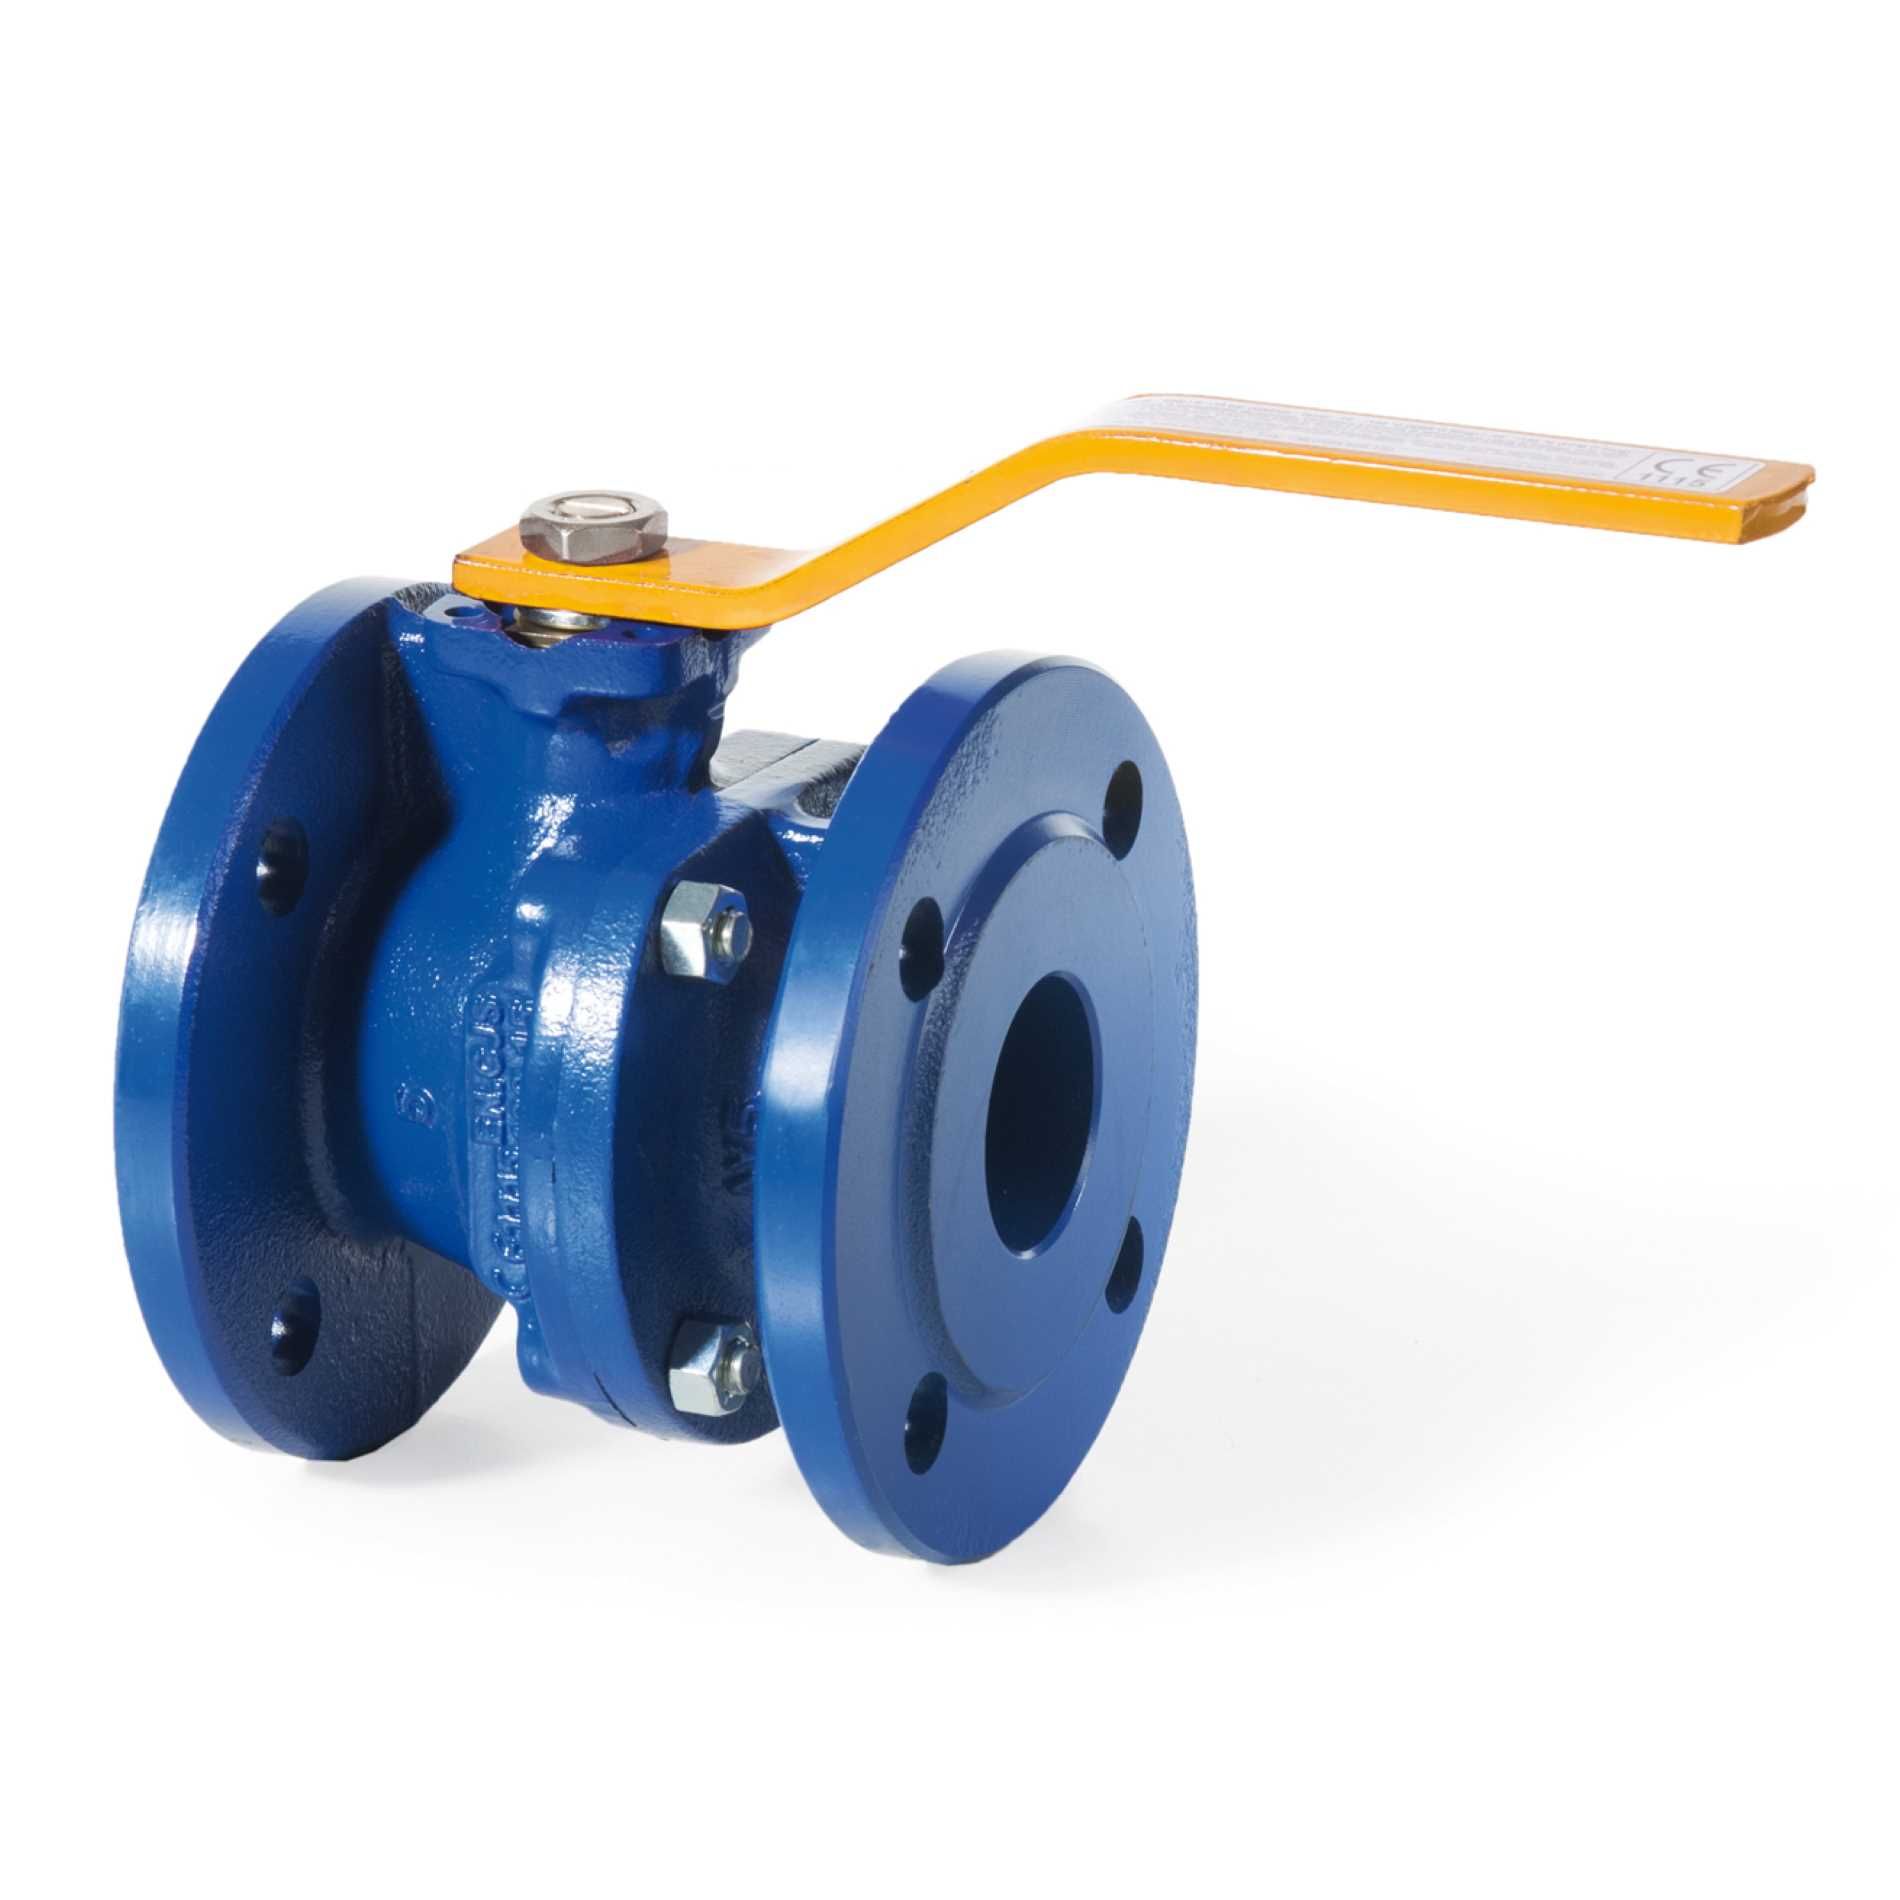 FLANGED BALL VALVE FOR METHANE GAS